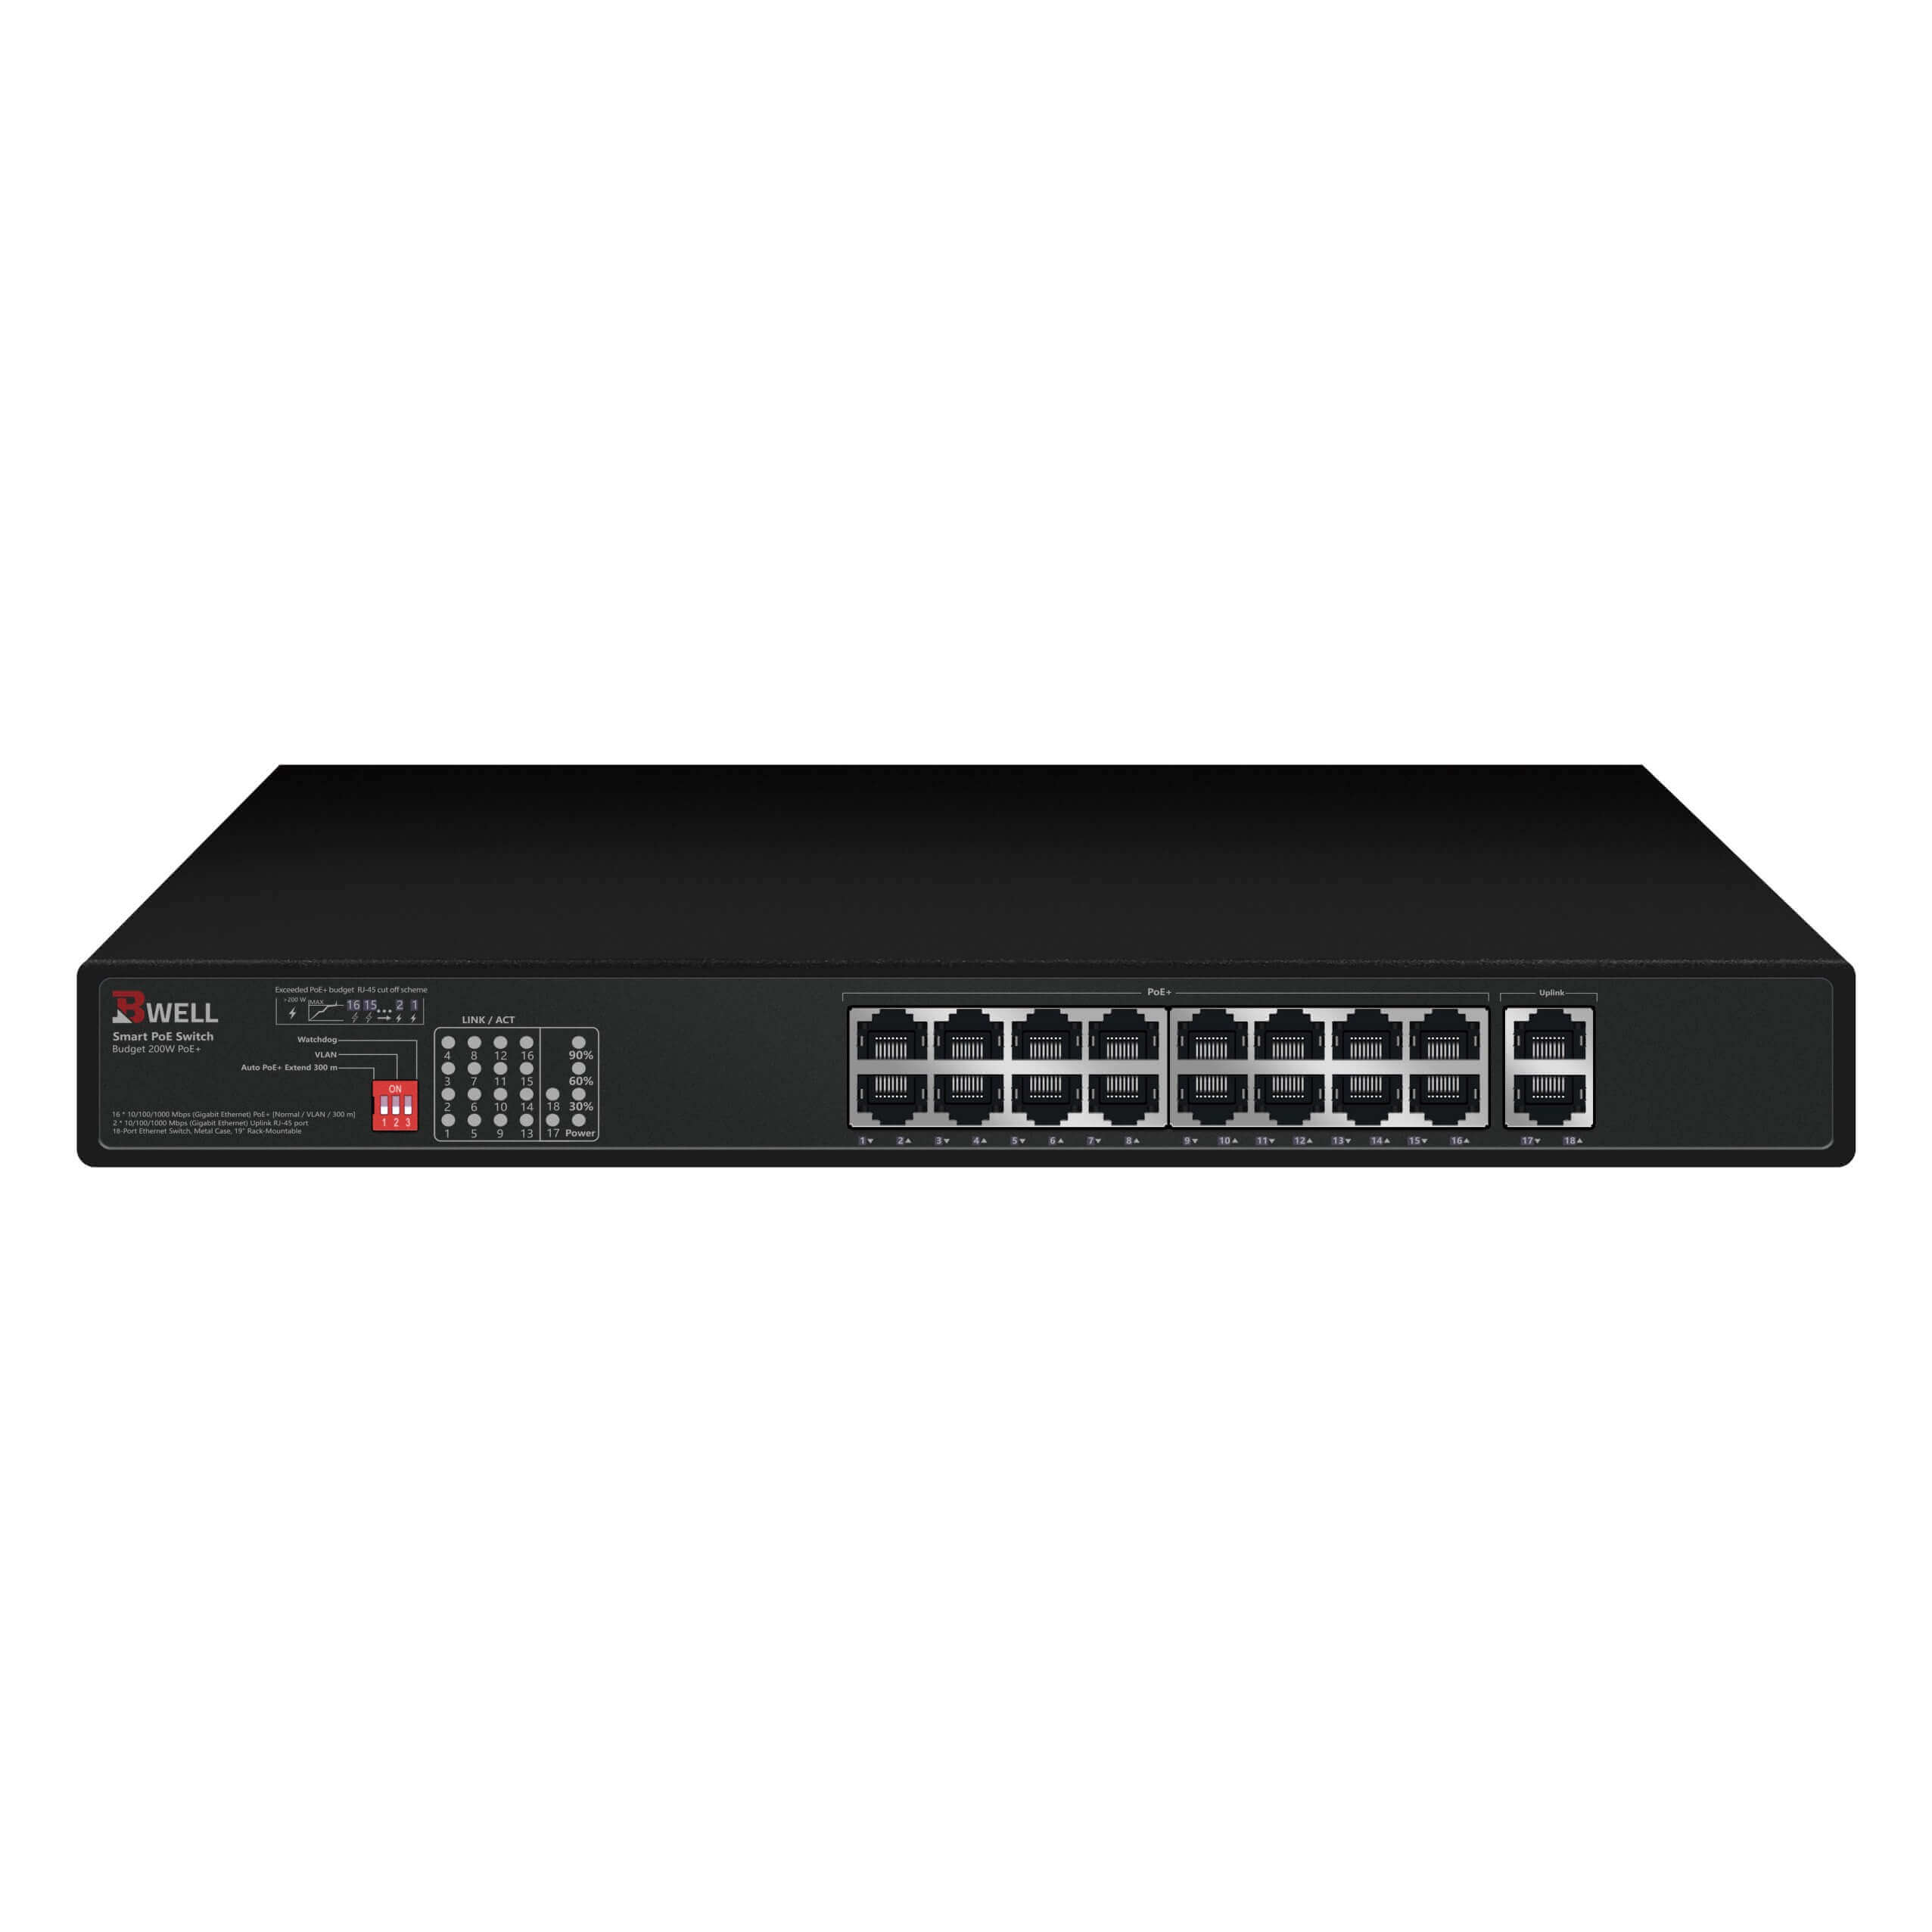 16 Port Gigabit PoE Switch at 10/100/1000 speed + 2 ports for connectivity